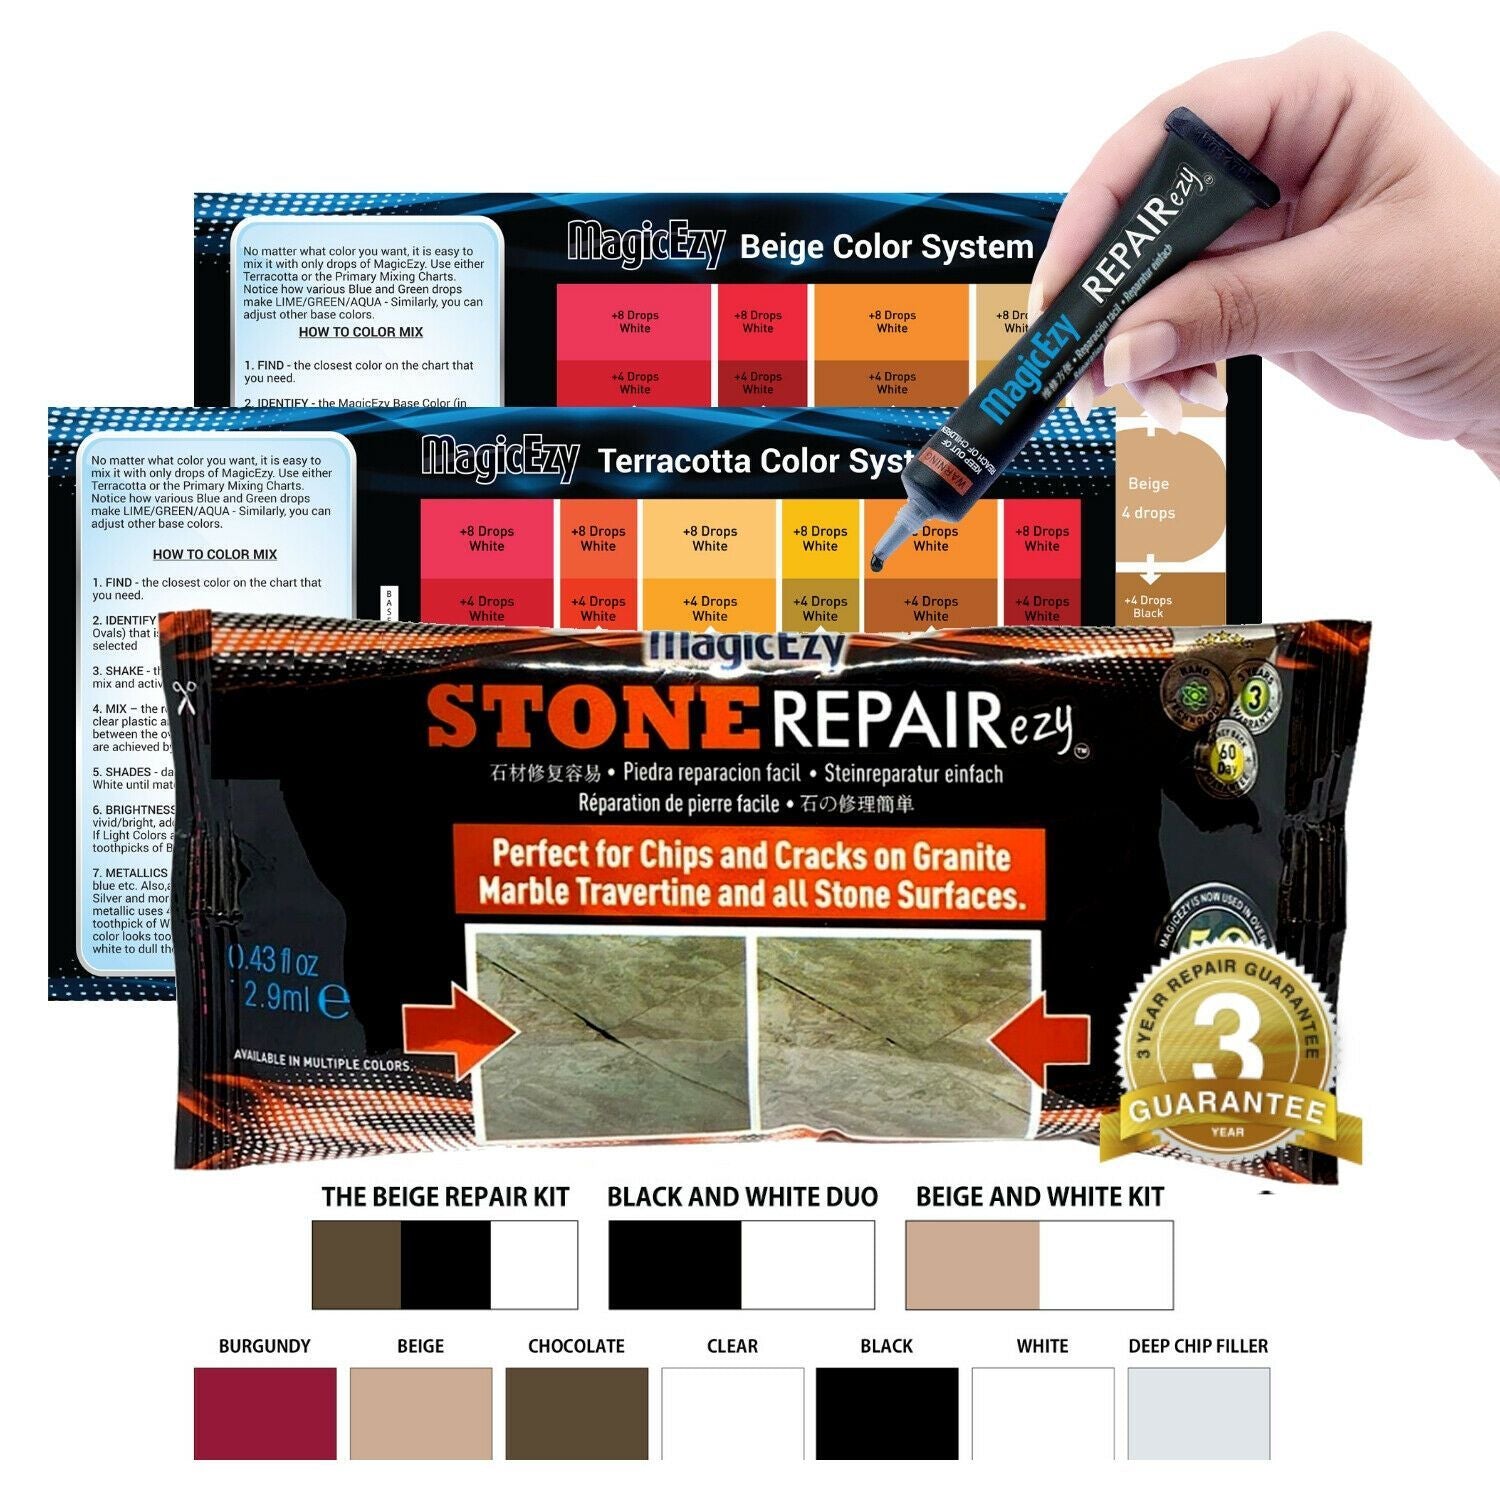 4 oz. Tub and Tile Chip Repair Kit in White